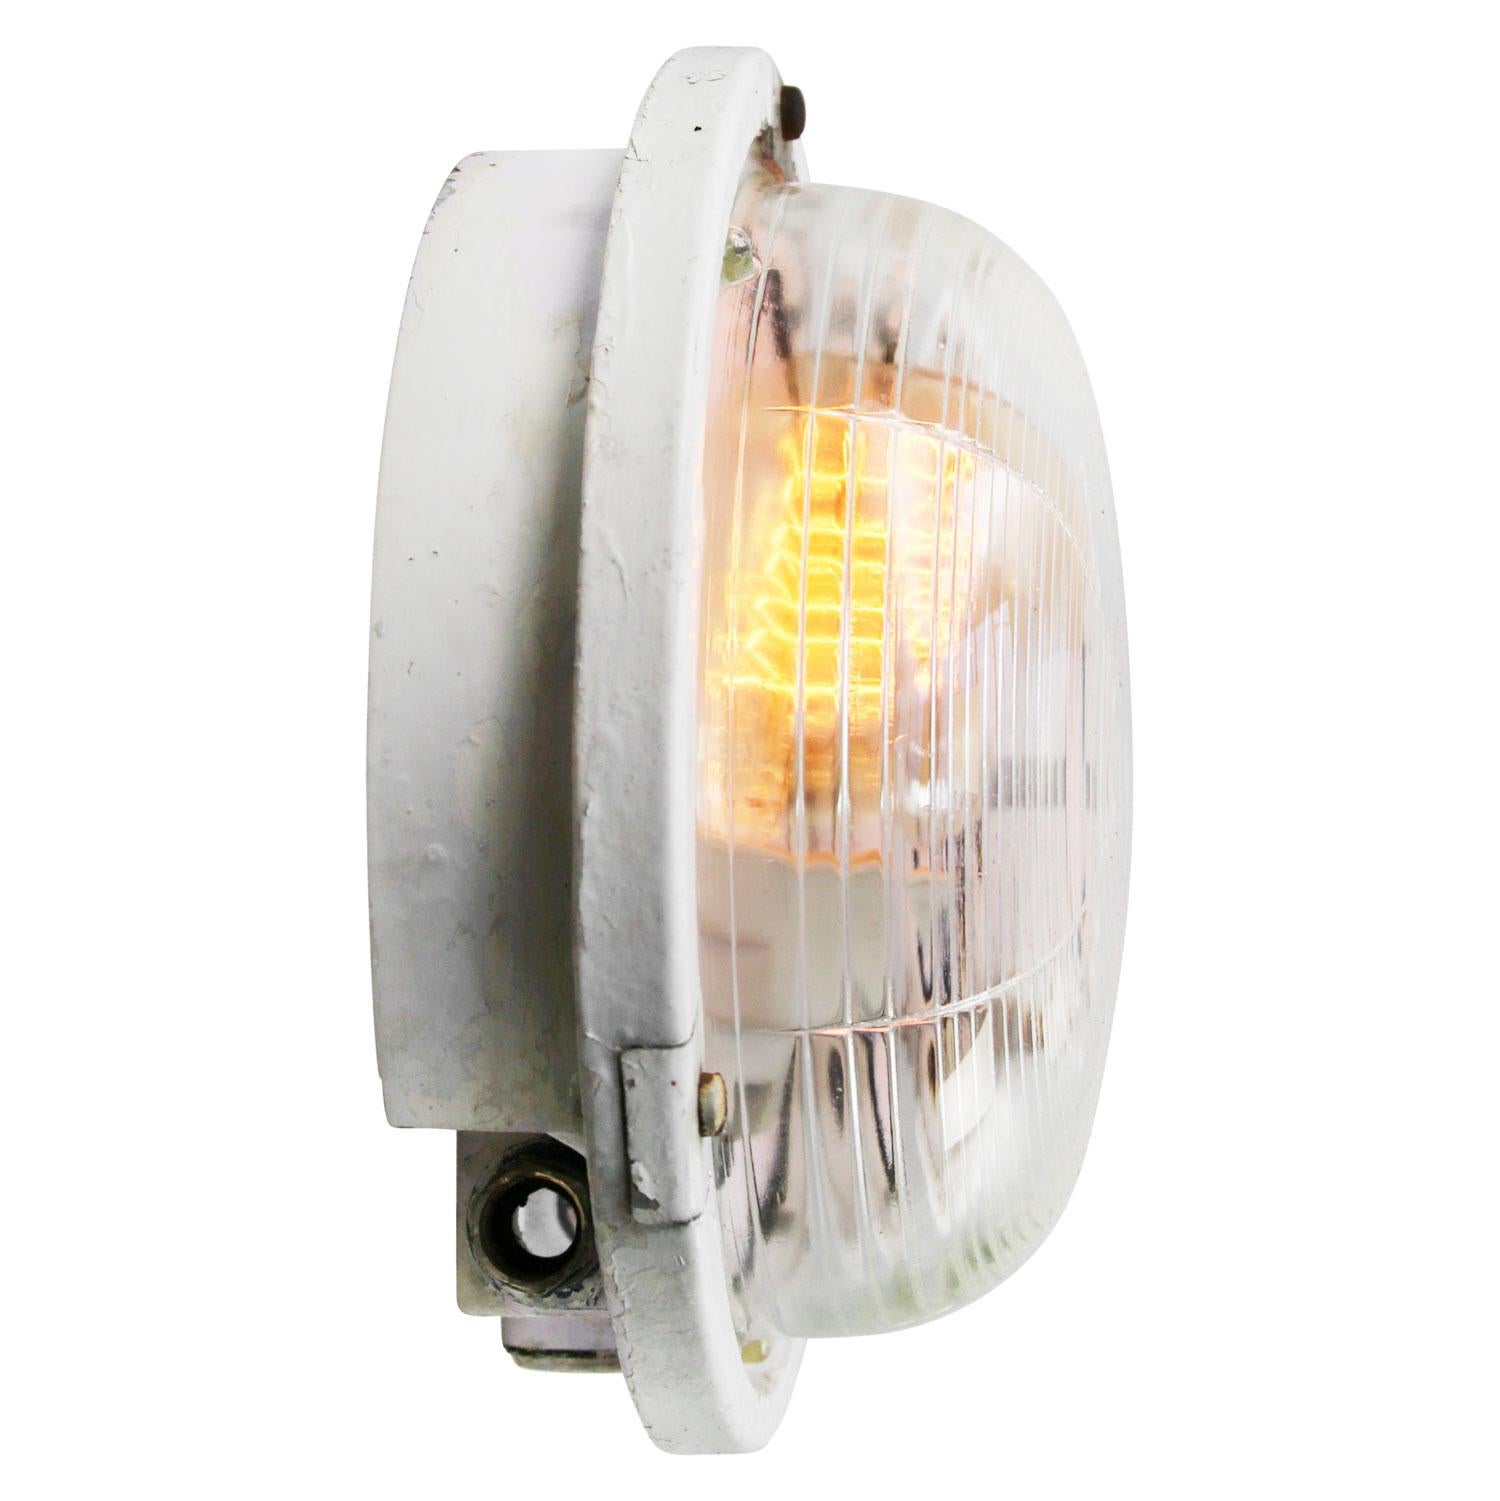 French Industrial wall / ceiling lamp
Metal back plate with clear striped glass.

Weight: 2.00 kg / 4.4 lb

Priced per individual item. All lamps have been made suitable by international standards for incandescent light bulbs, energy-efficient